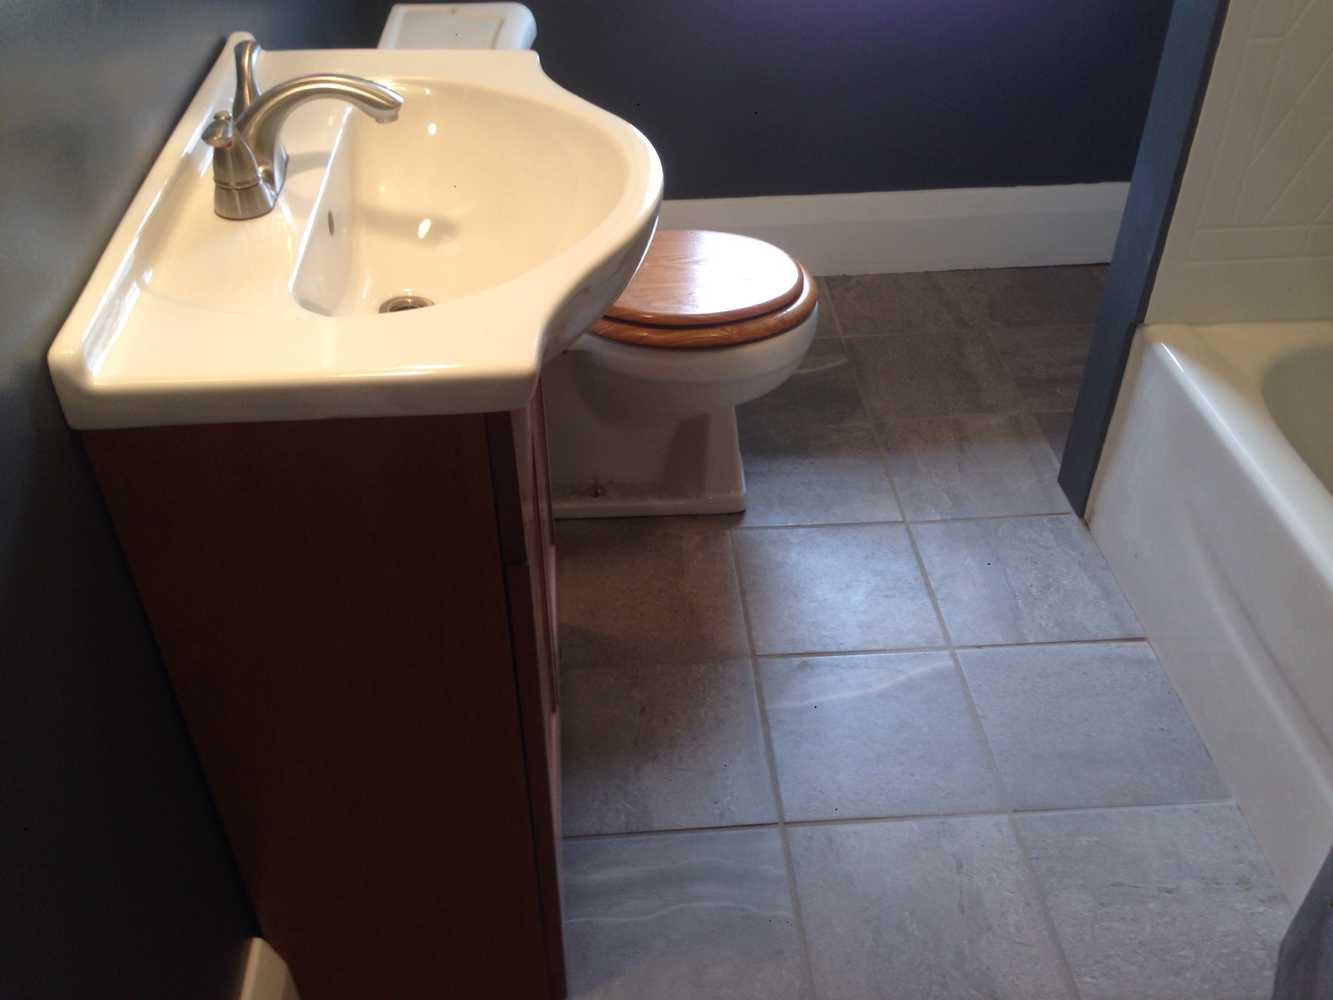 Low budget bathroom remodel--we still turn it out beautiful!